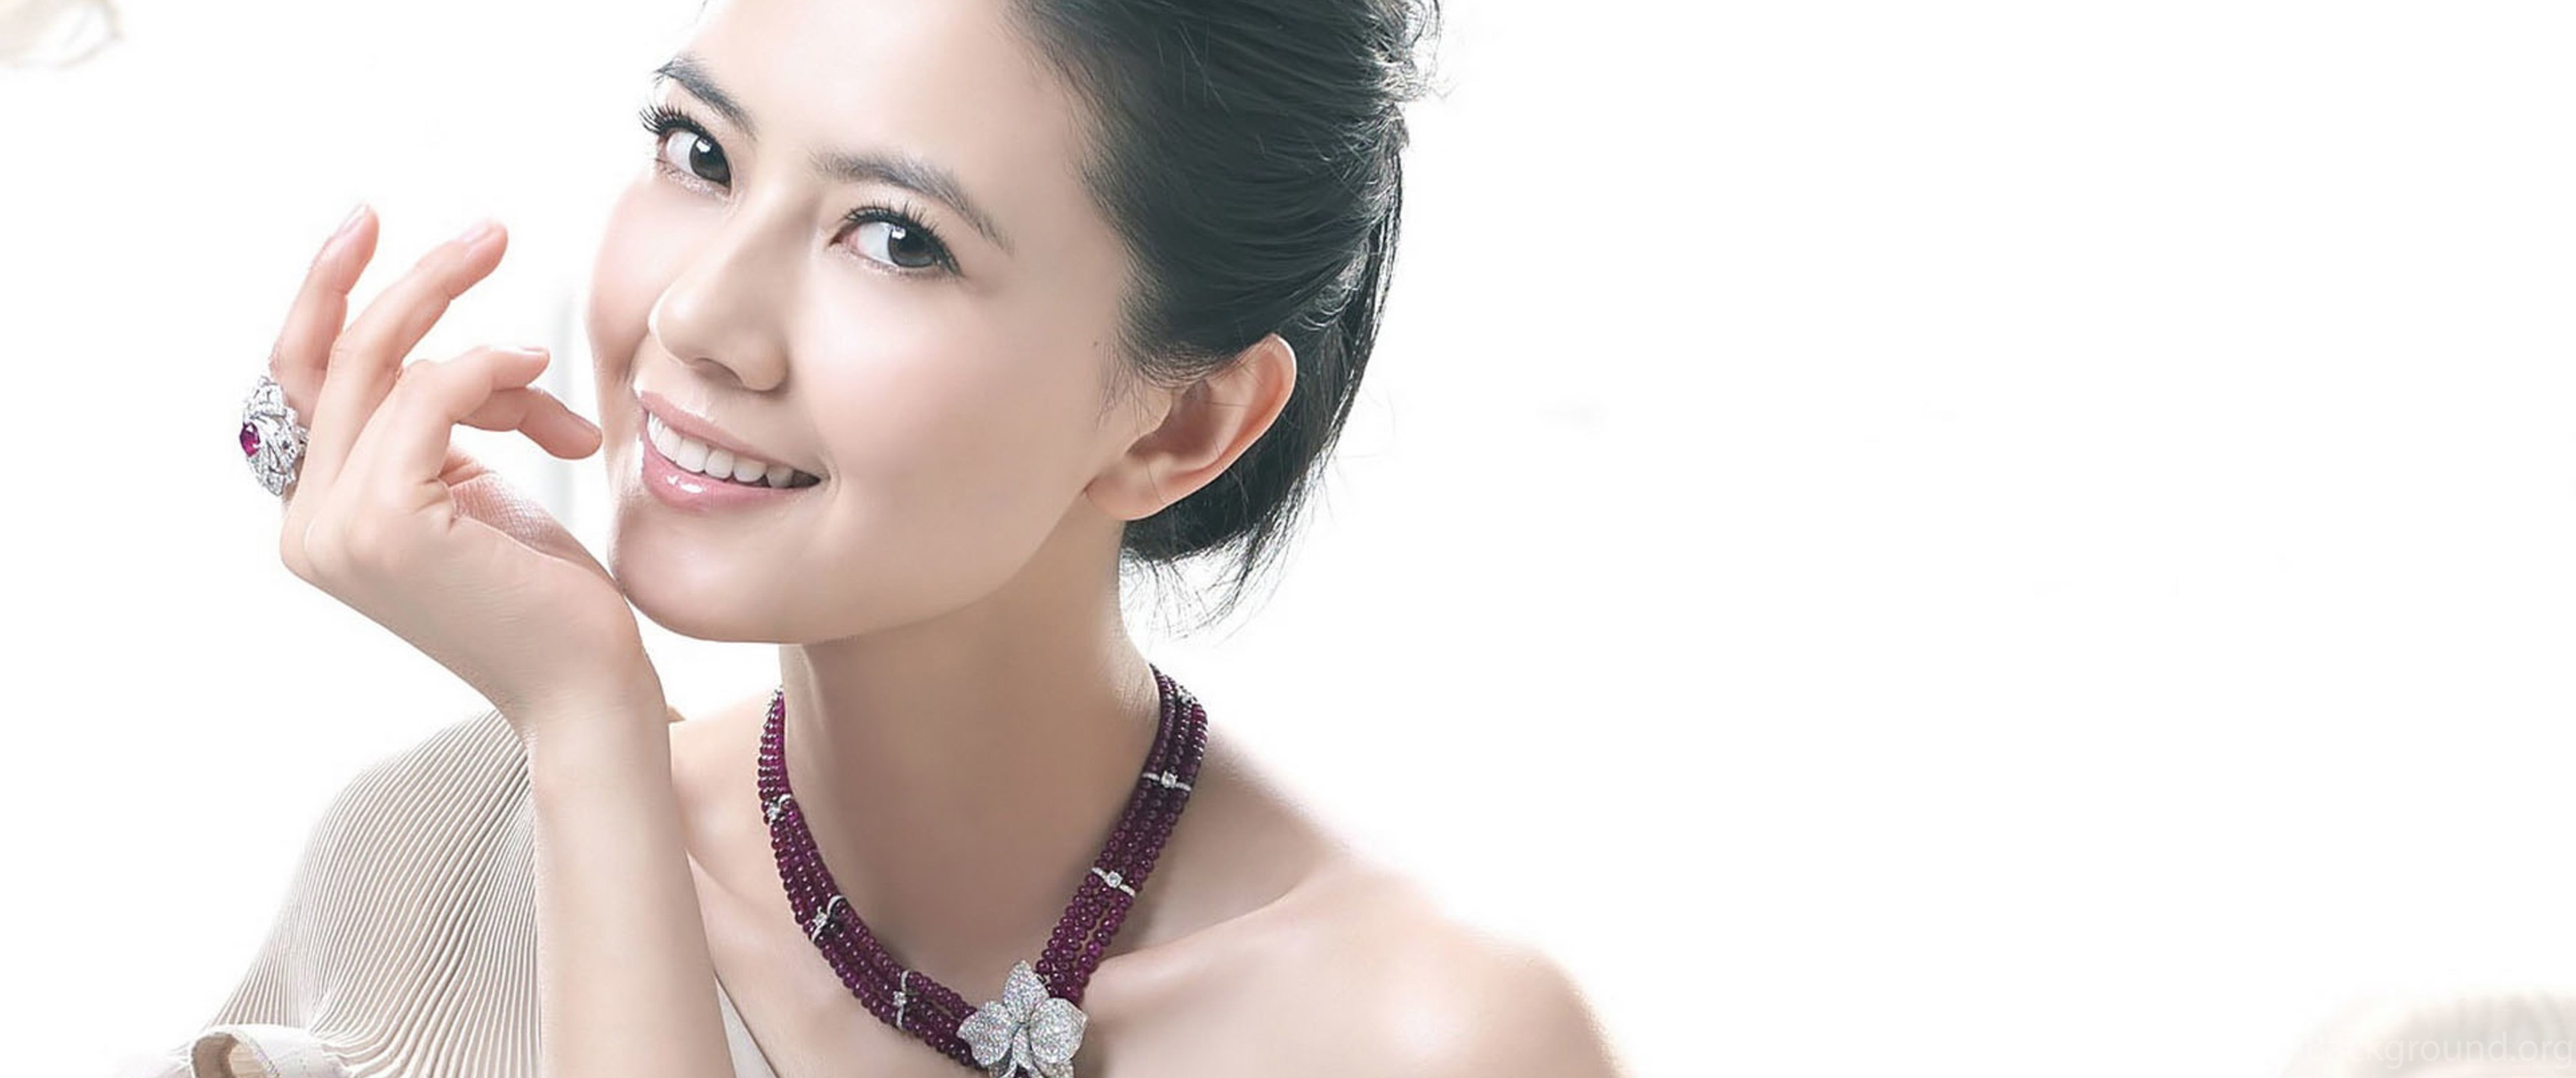 Download Wallpapers Download 5120x3200 Gao Yuanyuan A Chinese Actress And M...